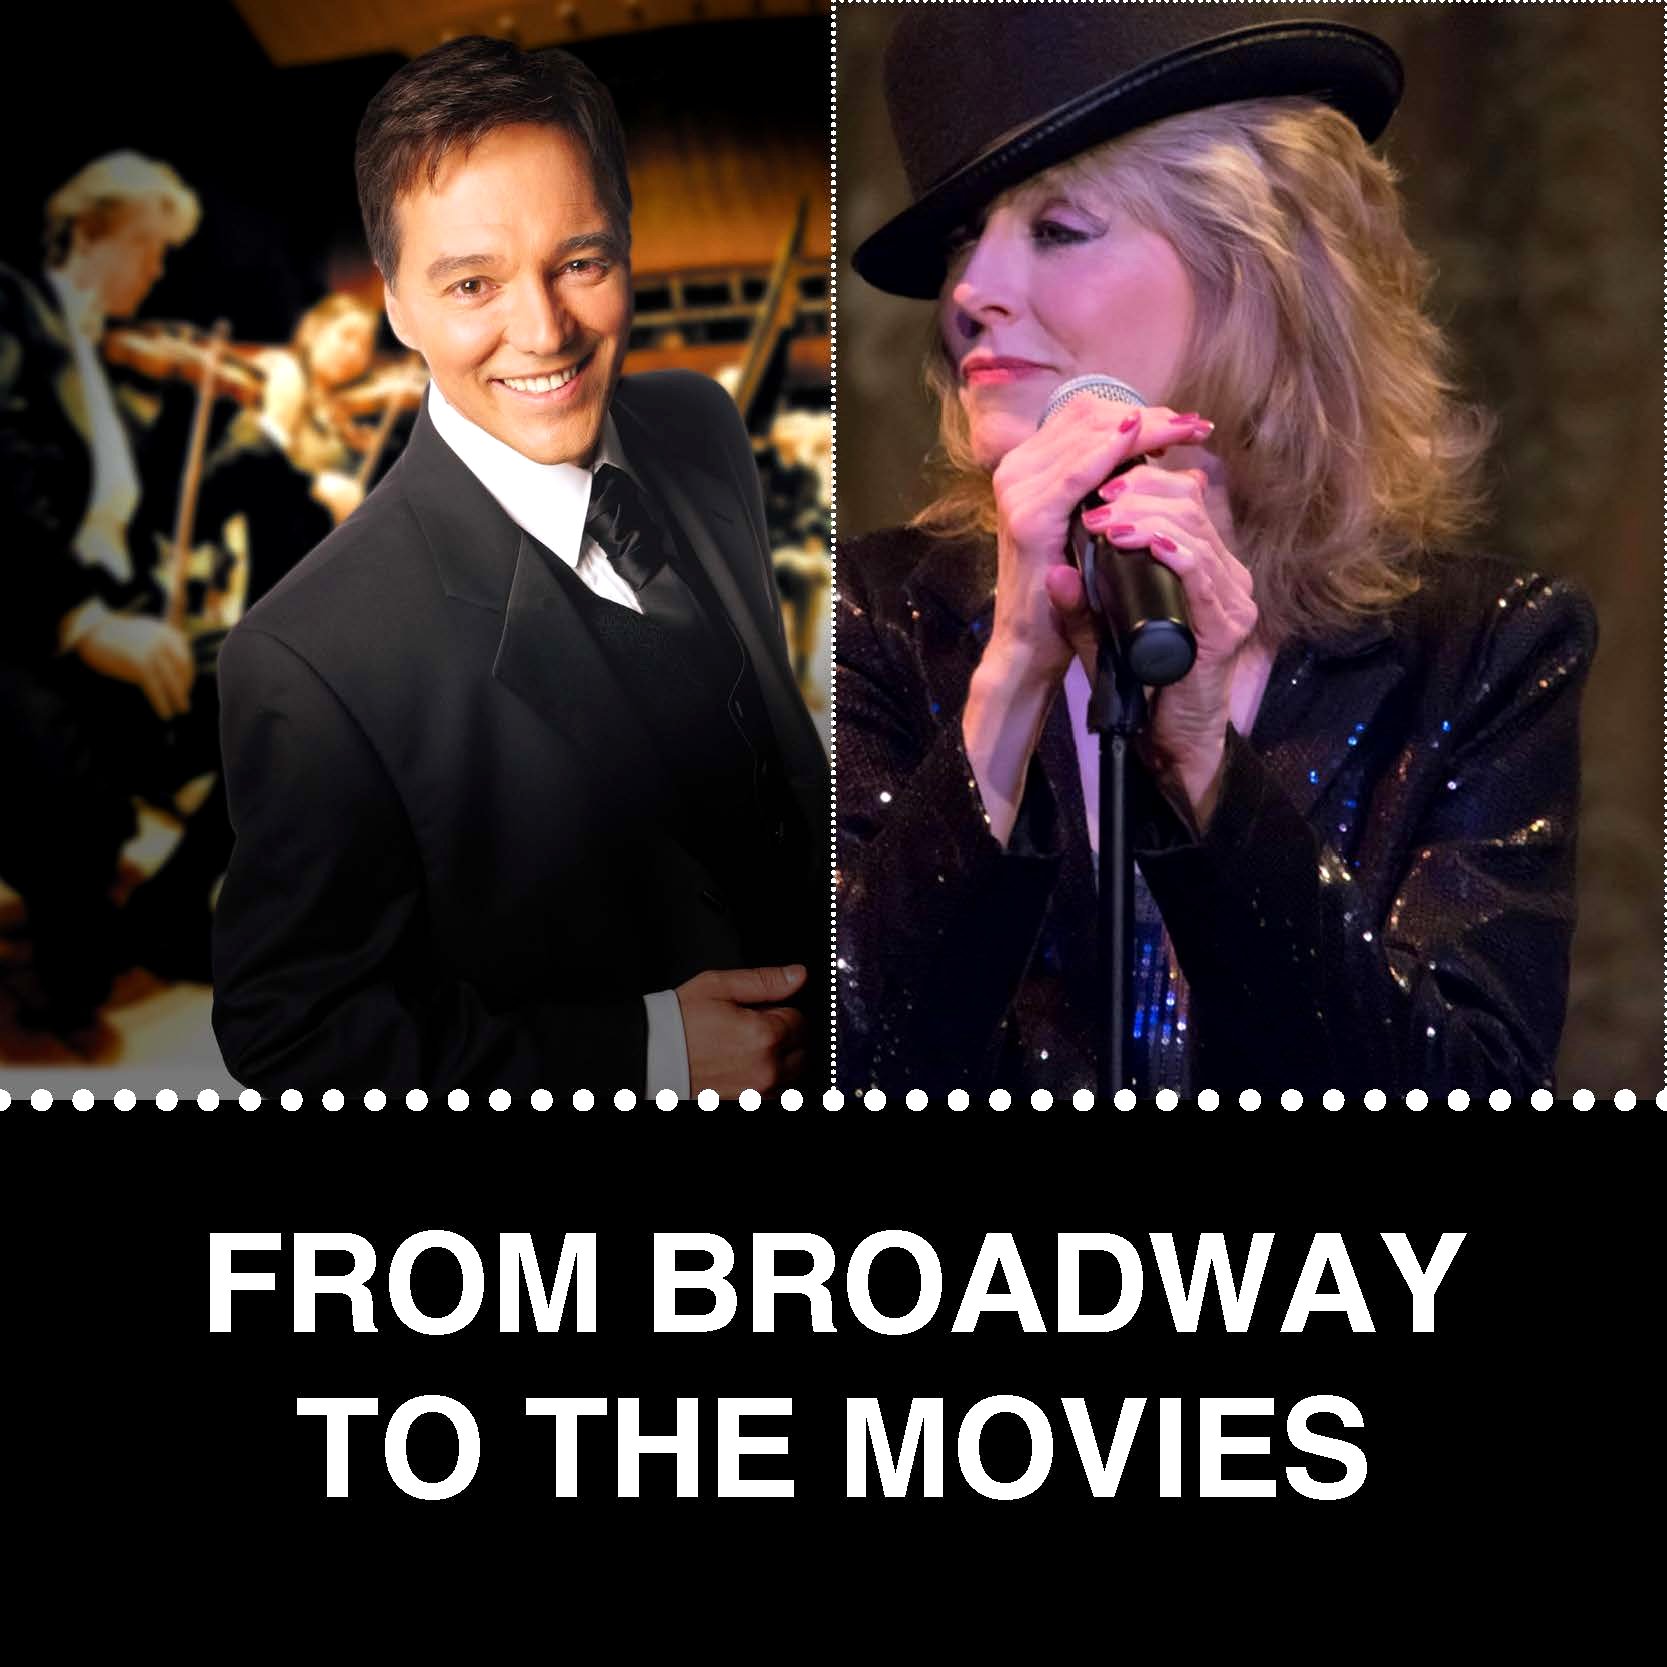 From Broadway to the Movies Google image from http://carmens.com/upcoming-shows/